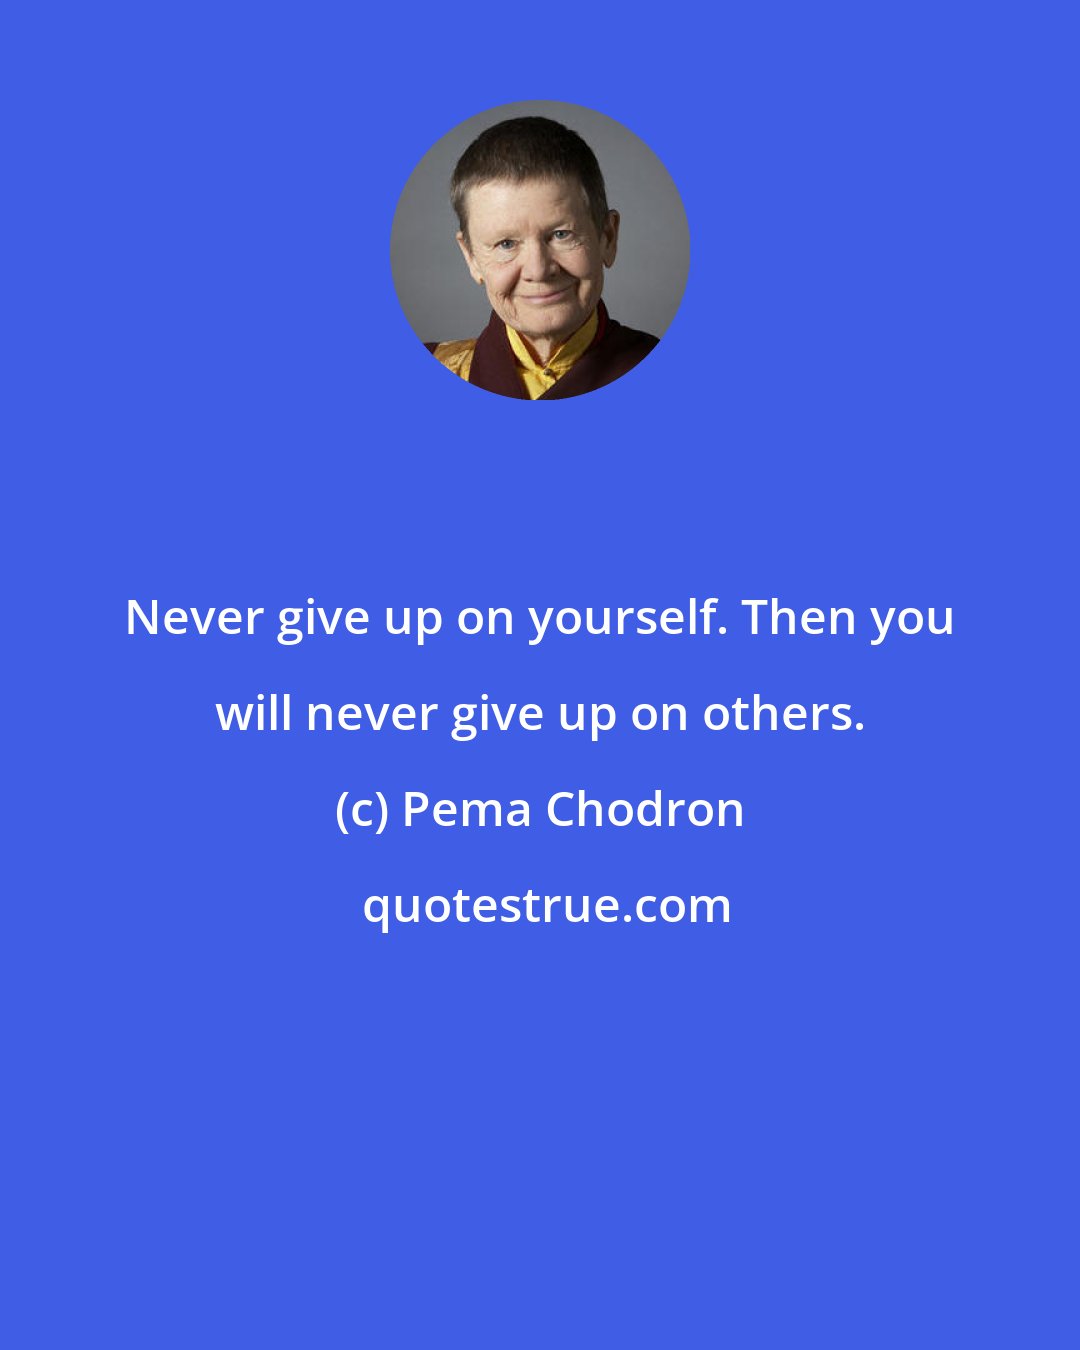 Pema Chodron: Never give up on yourself. Then you will never give up on others.